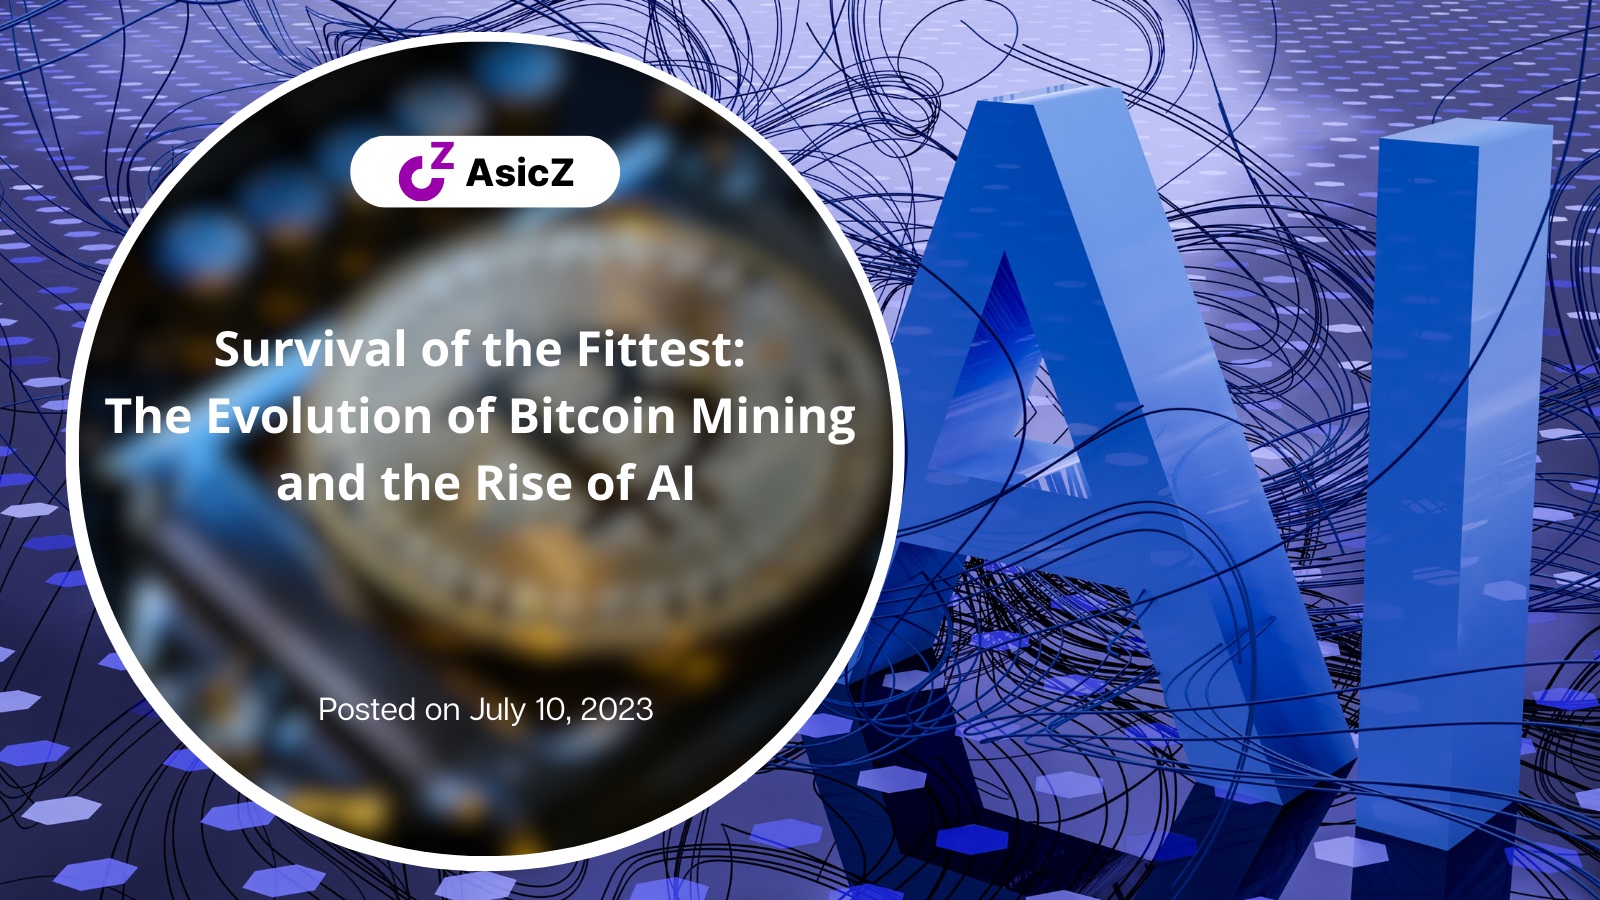 Survival of the Fittest: The Evolution of Bitcoin Mining and the Rise of AI